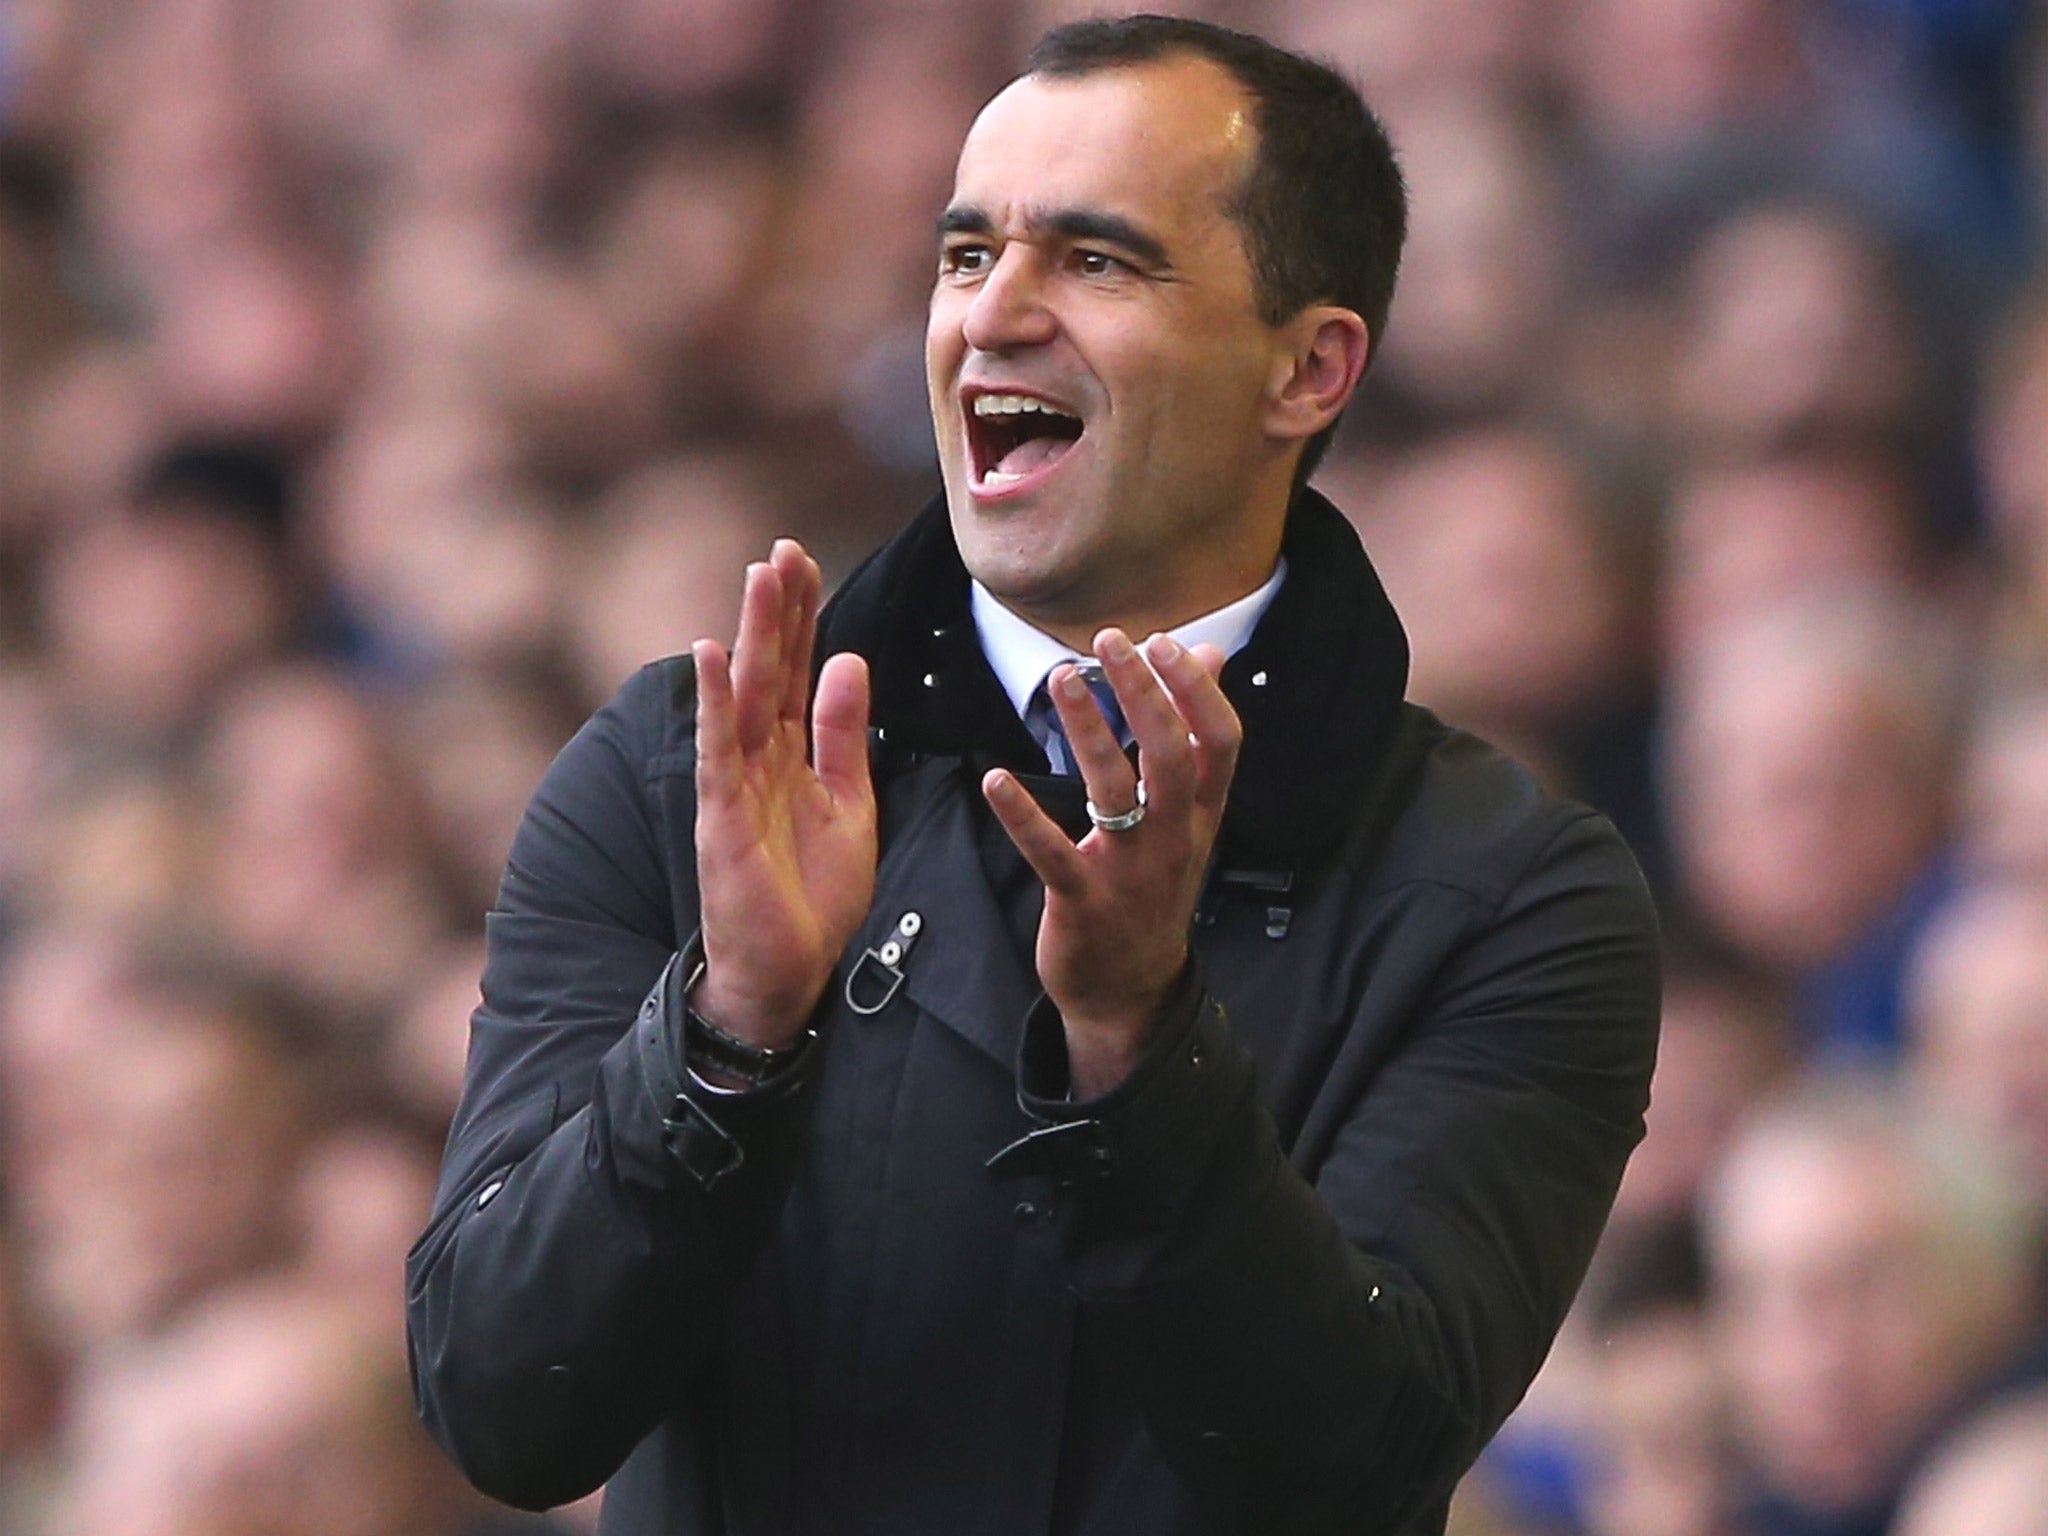 Everton have a record points tally under Roberto Martinez